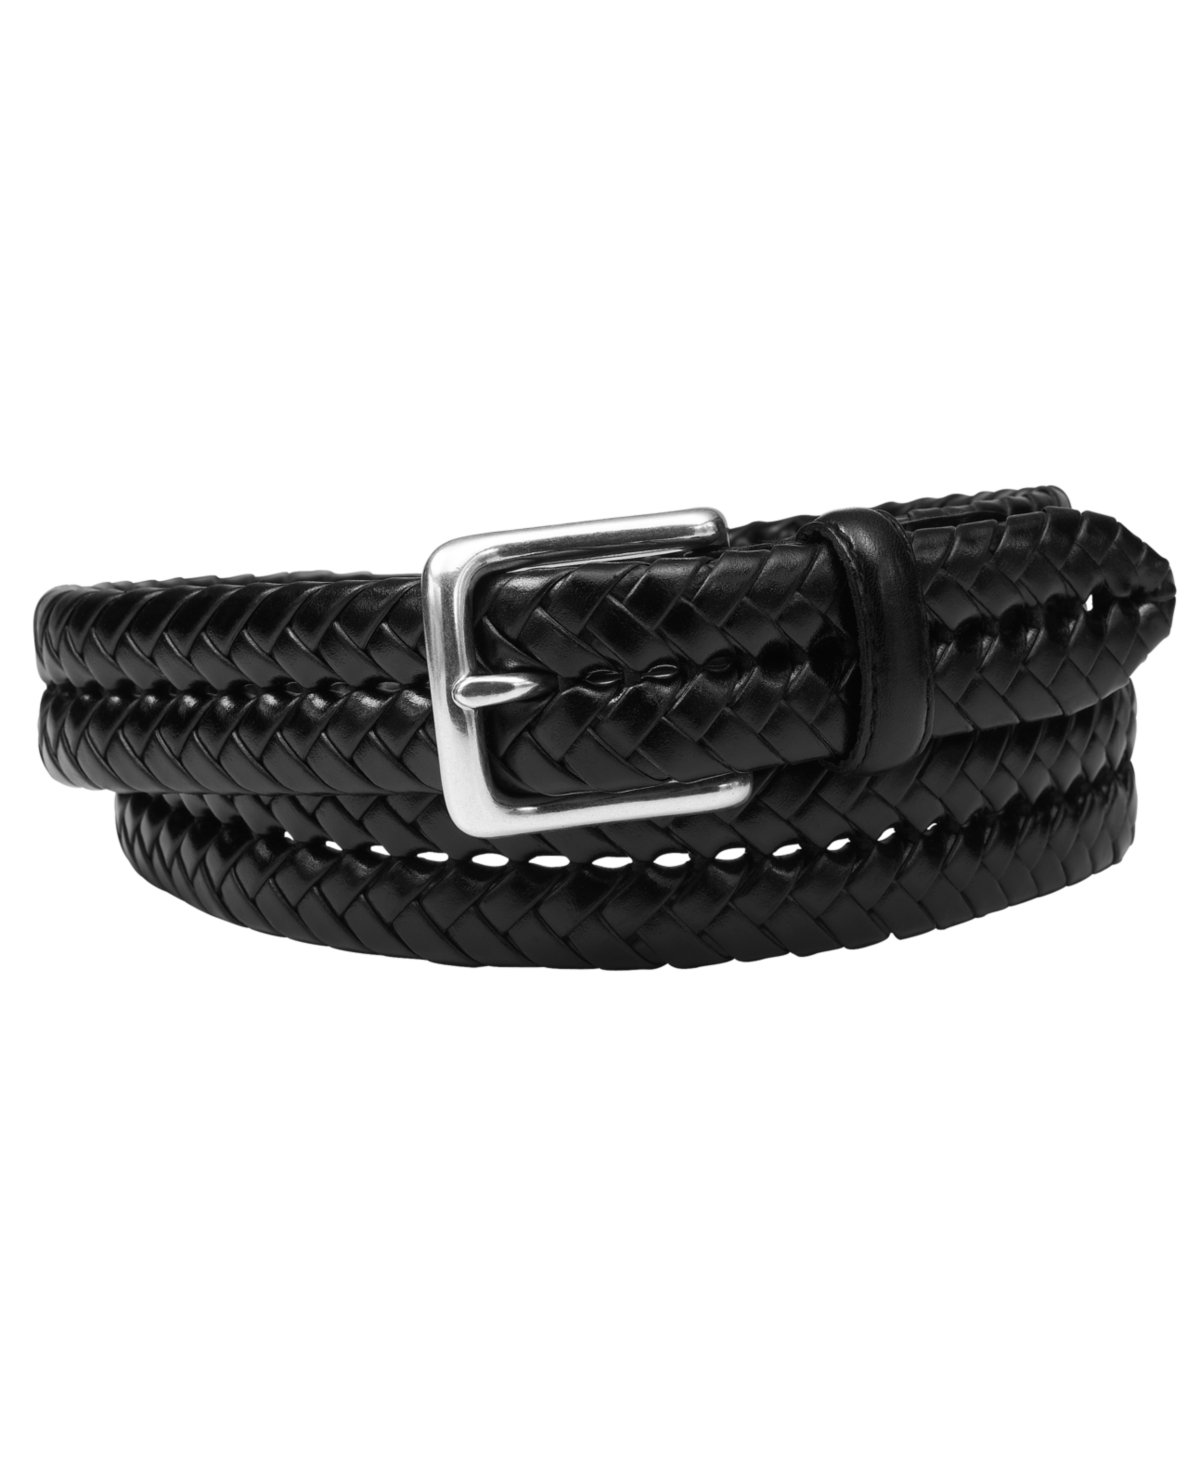 UPC 762346083511 product image for Fossil Maddox Braided Leather Belt | upcitemdb.com